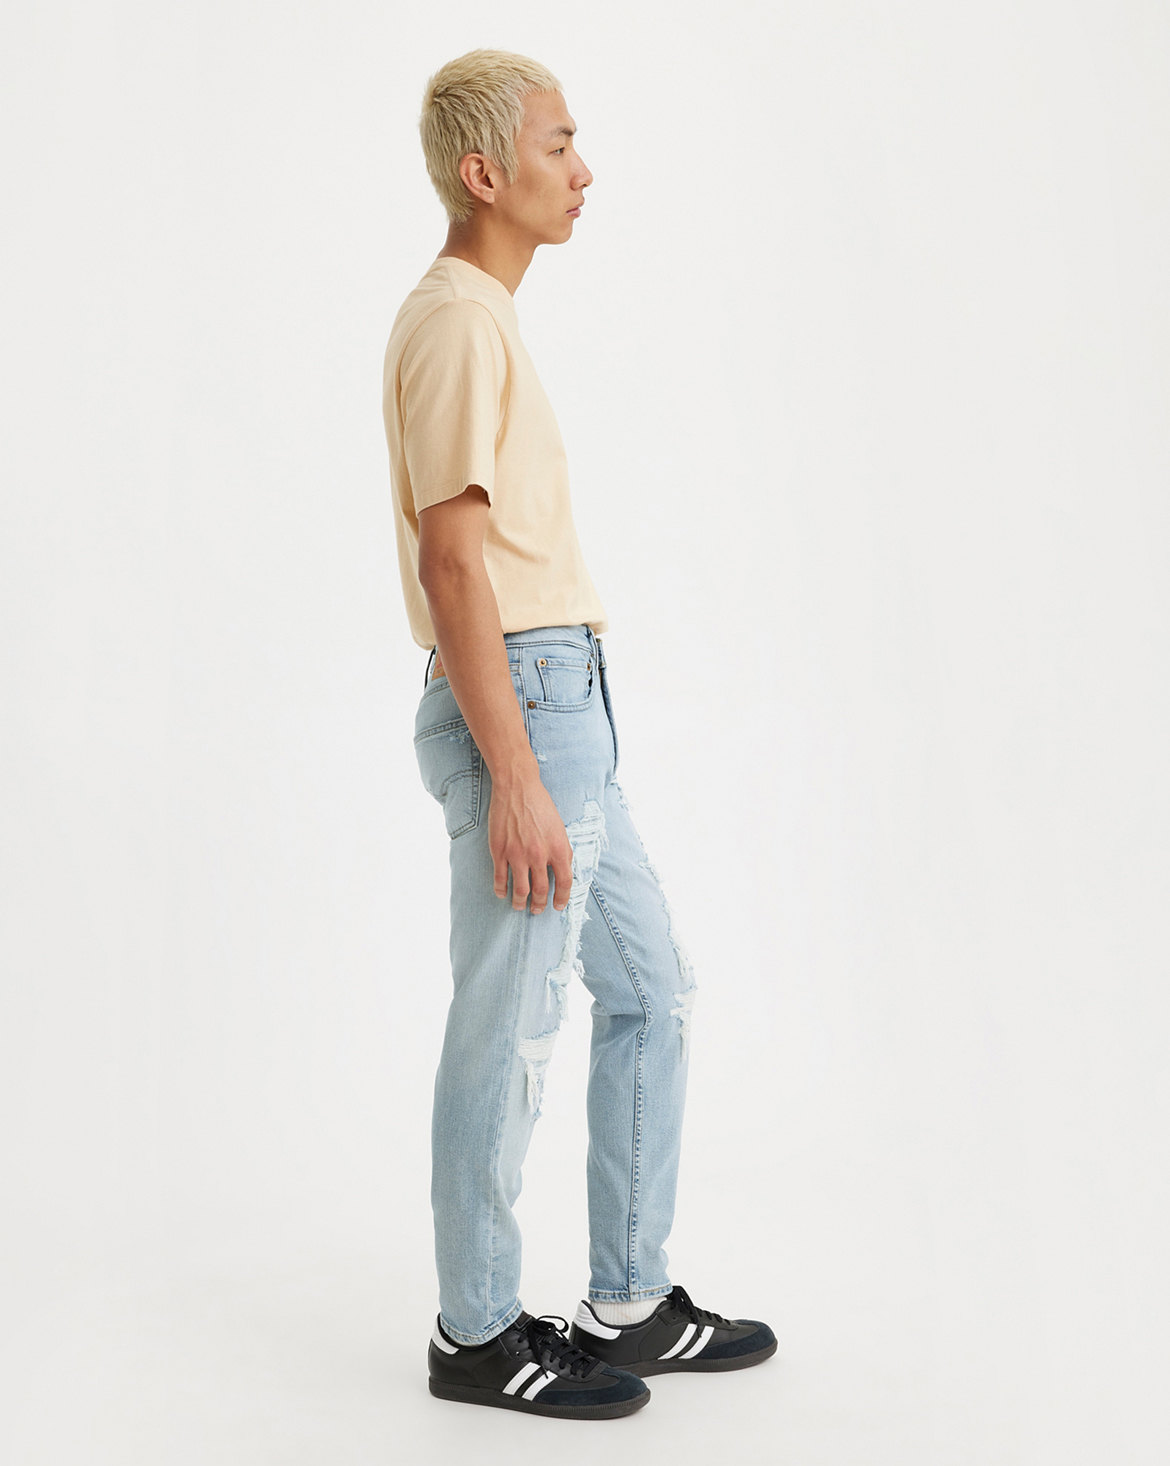 512™ Slim Tapered Fit Jeans | Levi